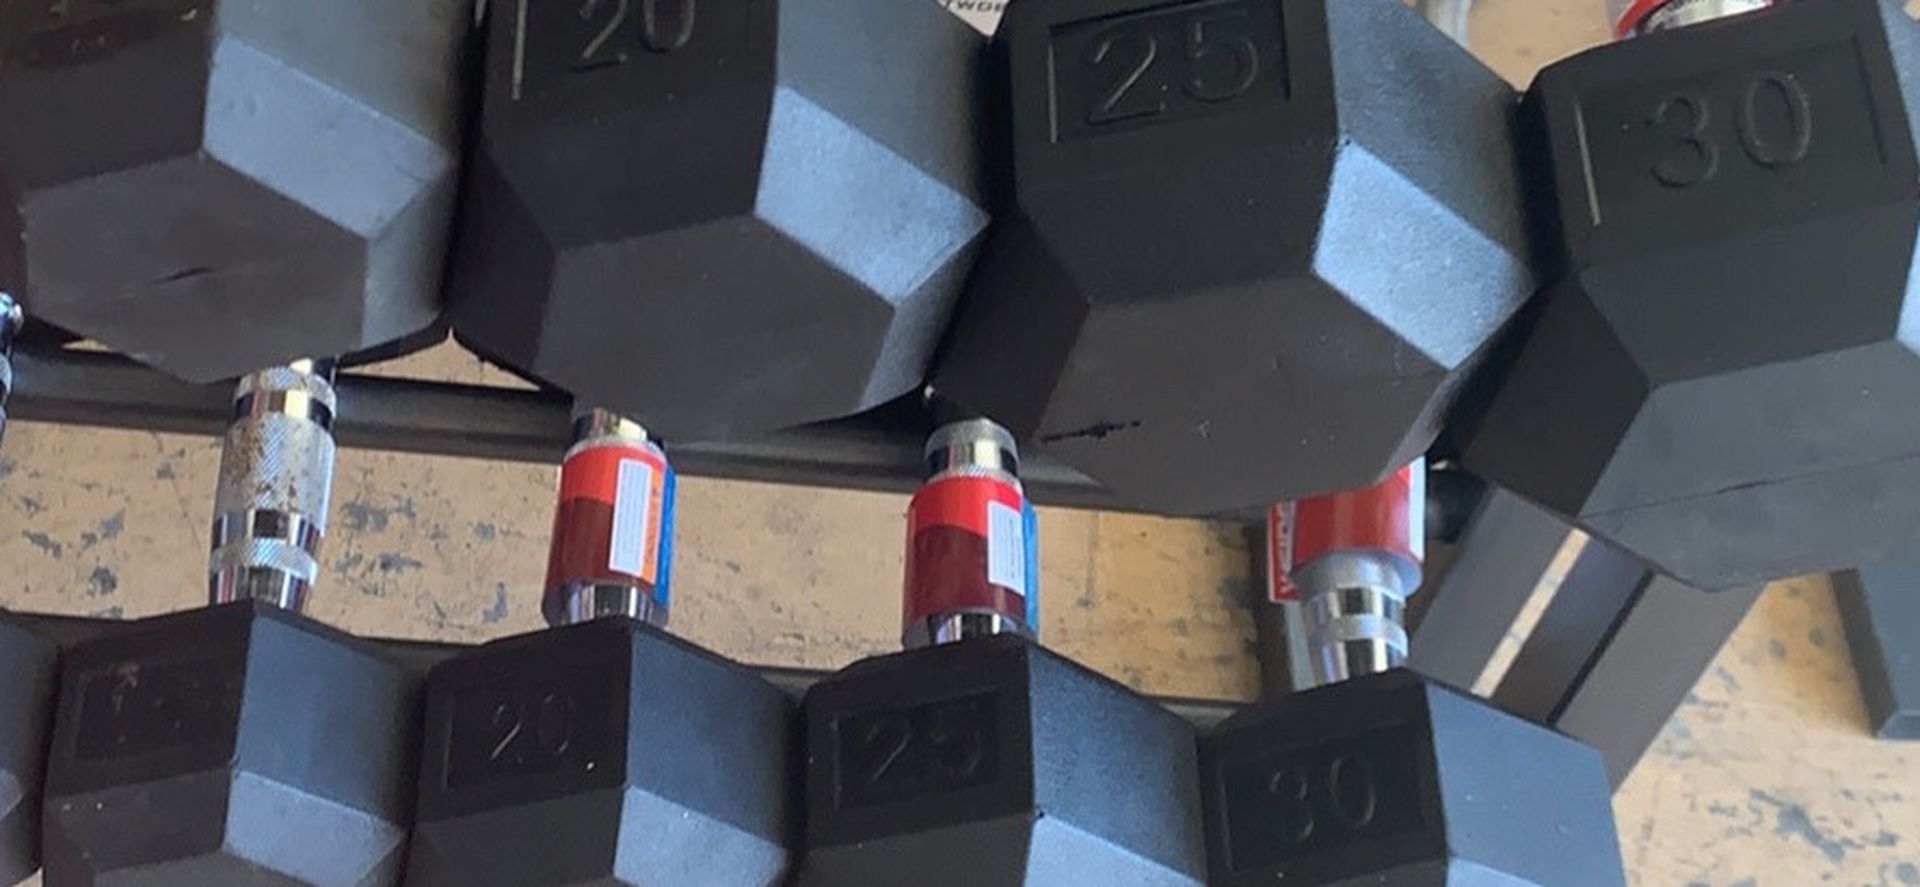 Rubber Hex Dumbbells And Rack All Brand New